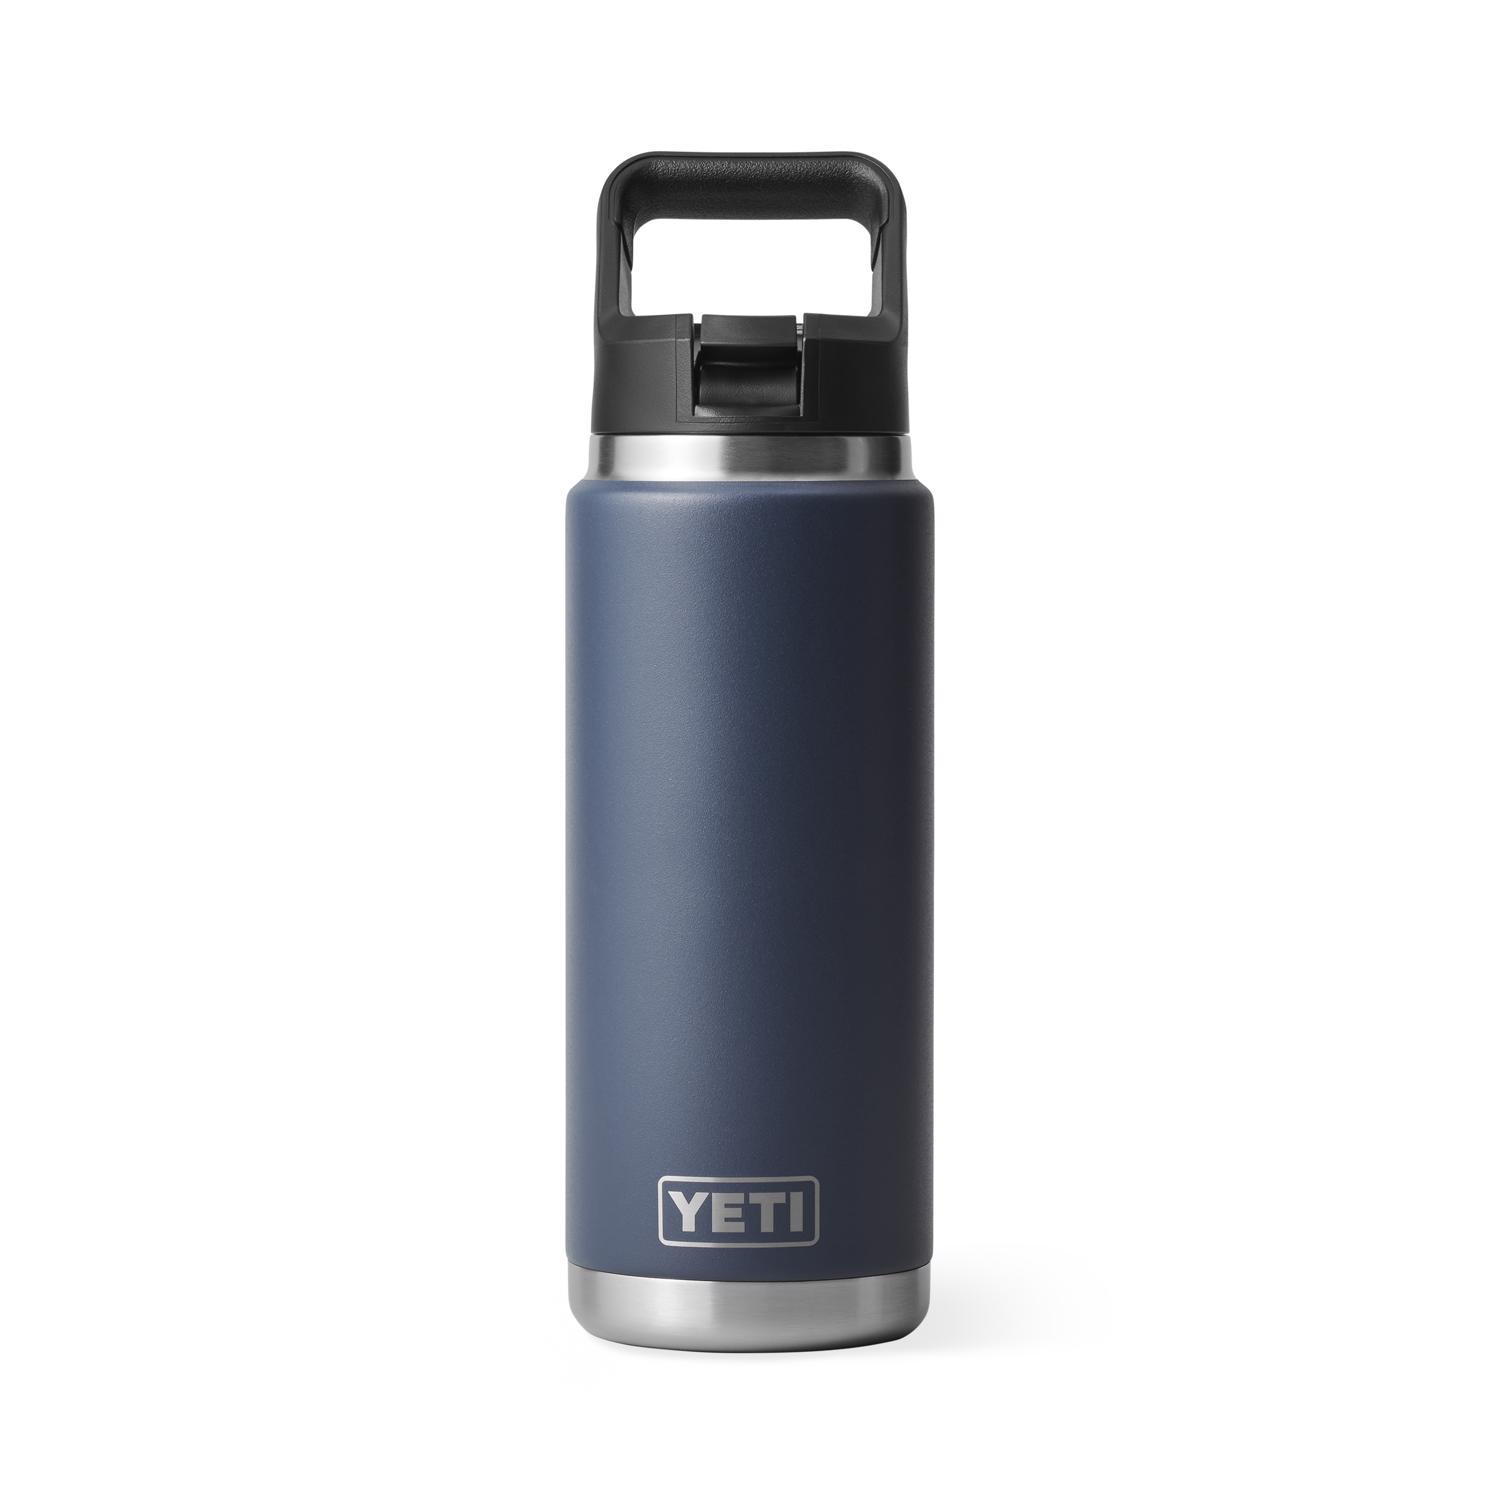 Photos - Other Accessories Yeti Rambler 26 oz Navy BPA Free Bottle with Straw Cap 21071501824 